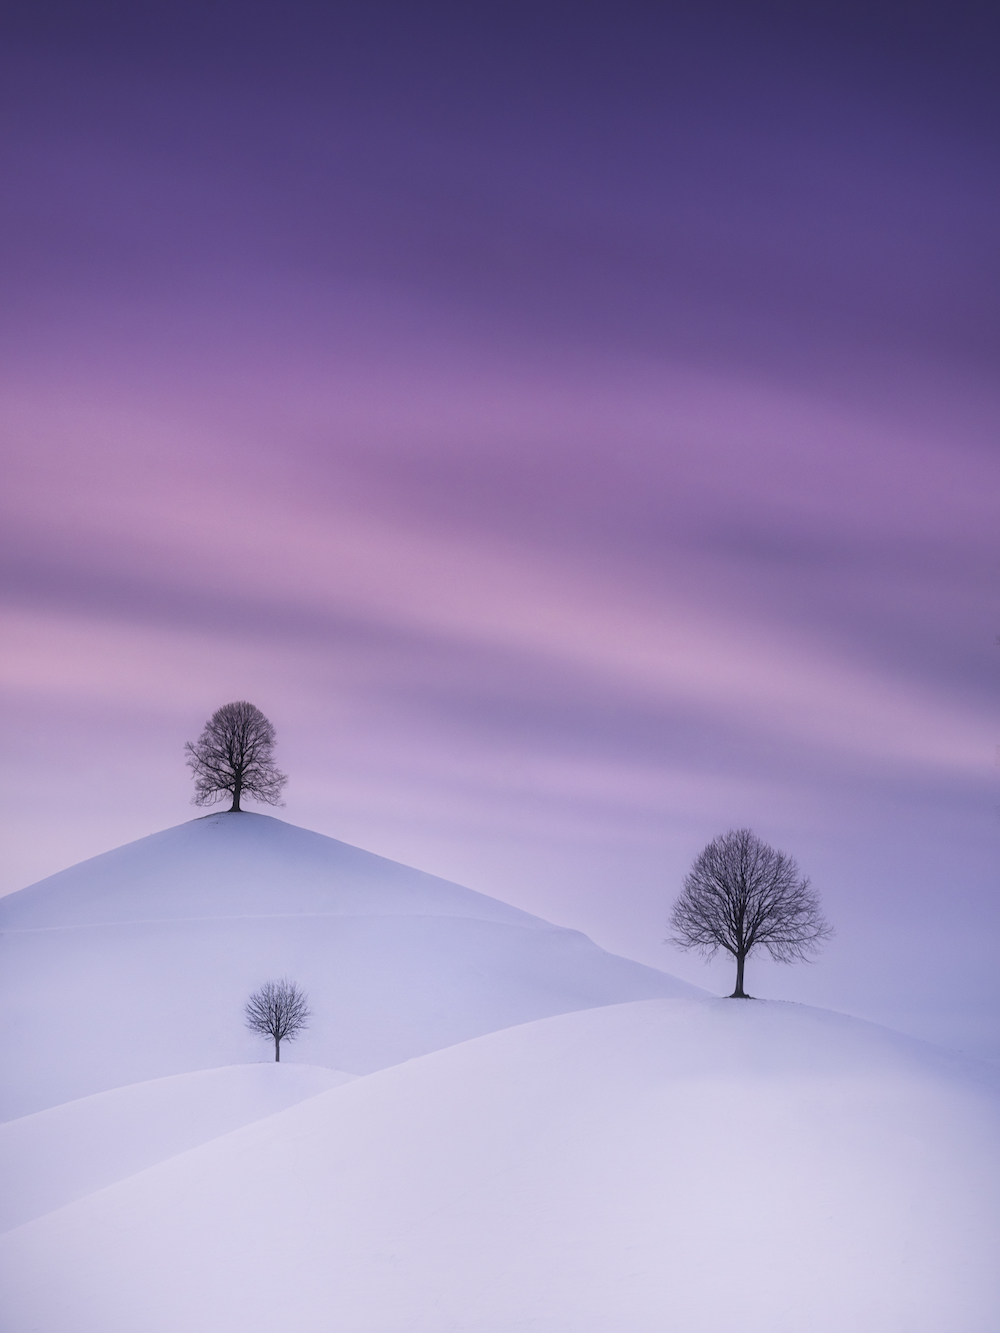 Cédric Tamani - The Drumlins in Winter, Menzingen, Switzerland, won him second place in the International Landscape Photograph of the Year 2021. Image: Cédric Tamani/The 8th International Landscape Photographer of the Year competition